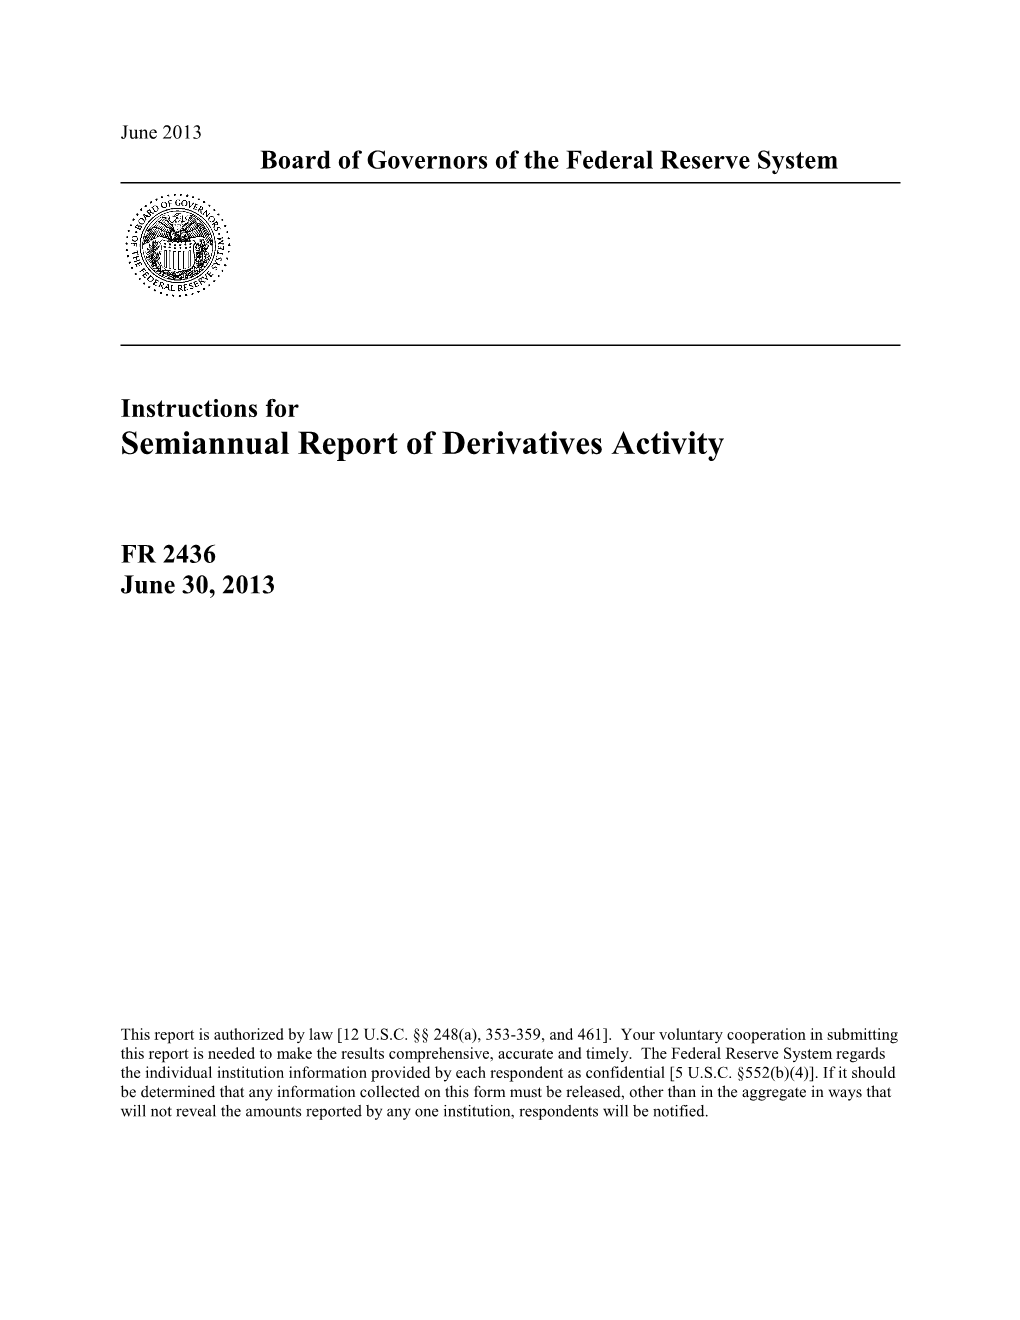 Semiannual Report of Derivatives Activity